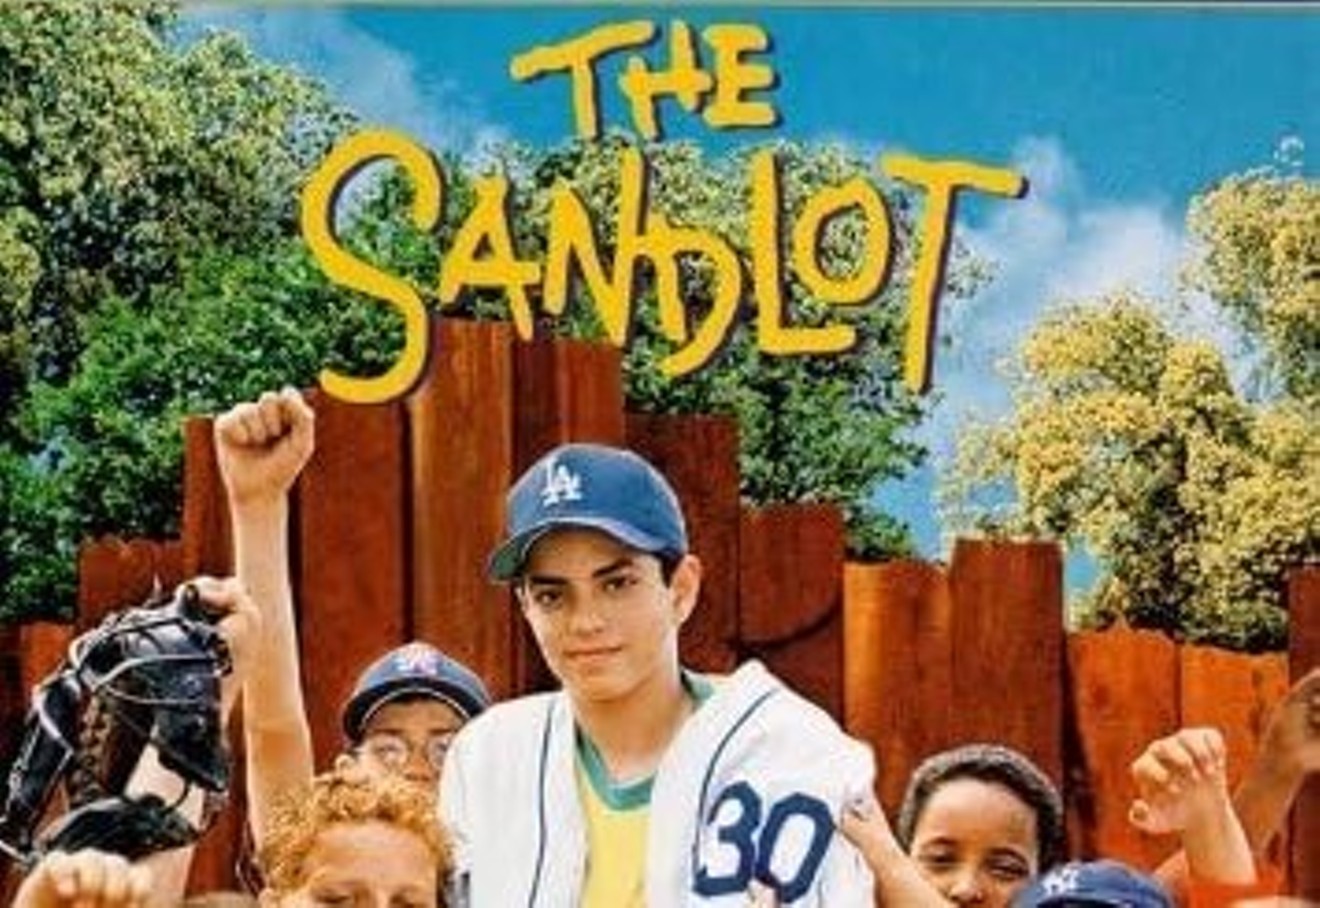 Want to meet some of the stars of "The Sandlot" in Phoenix? Here's your chance.